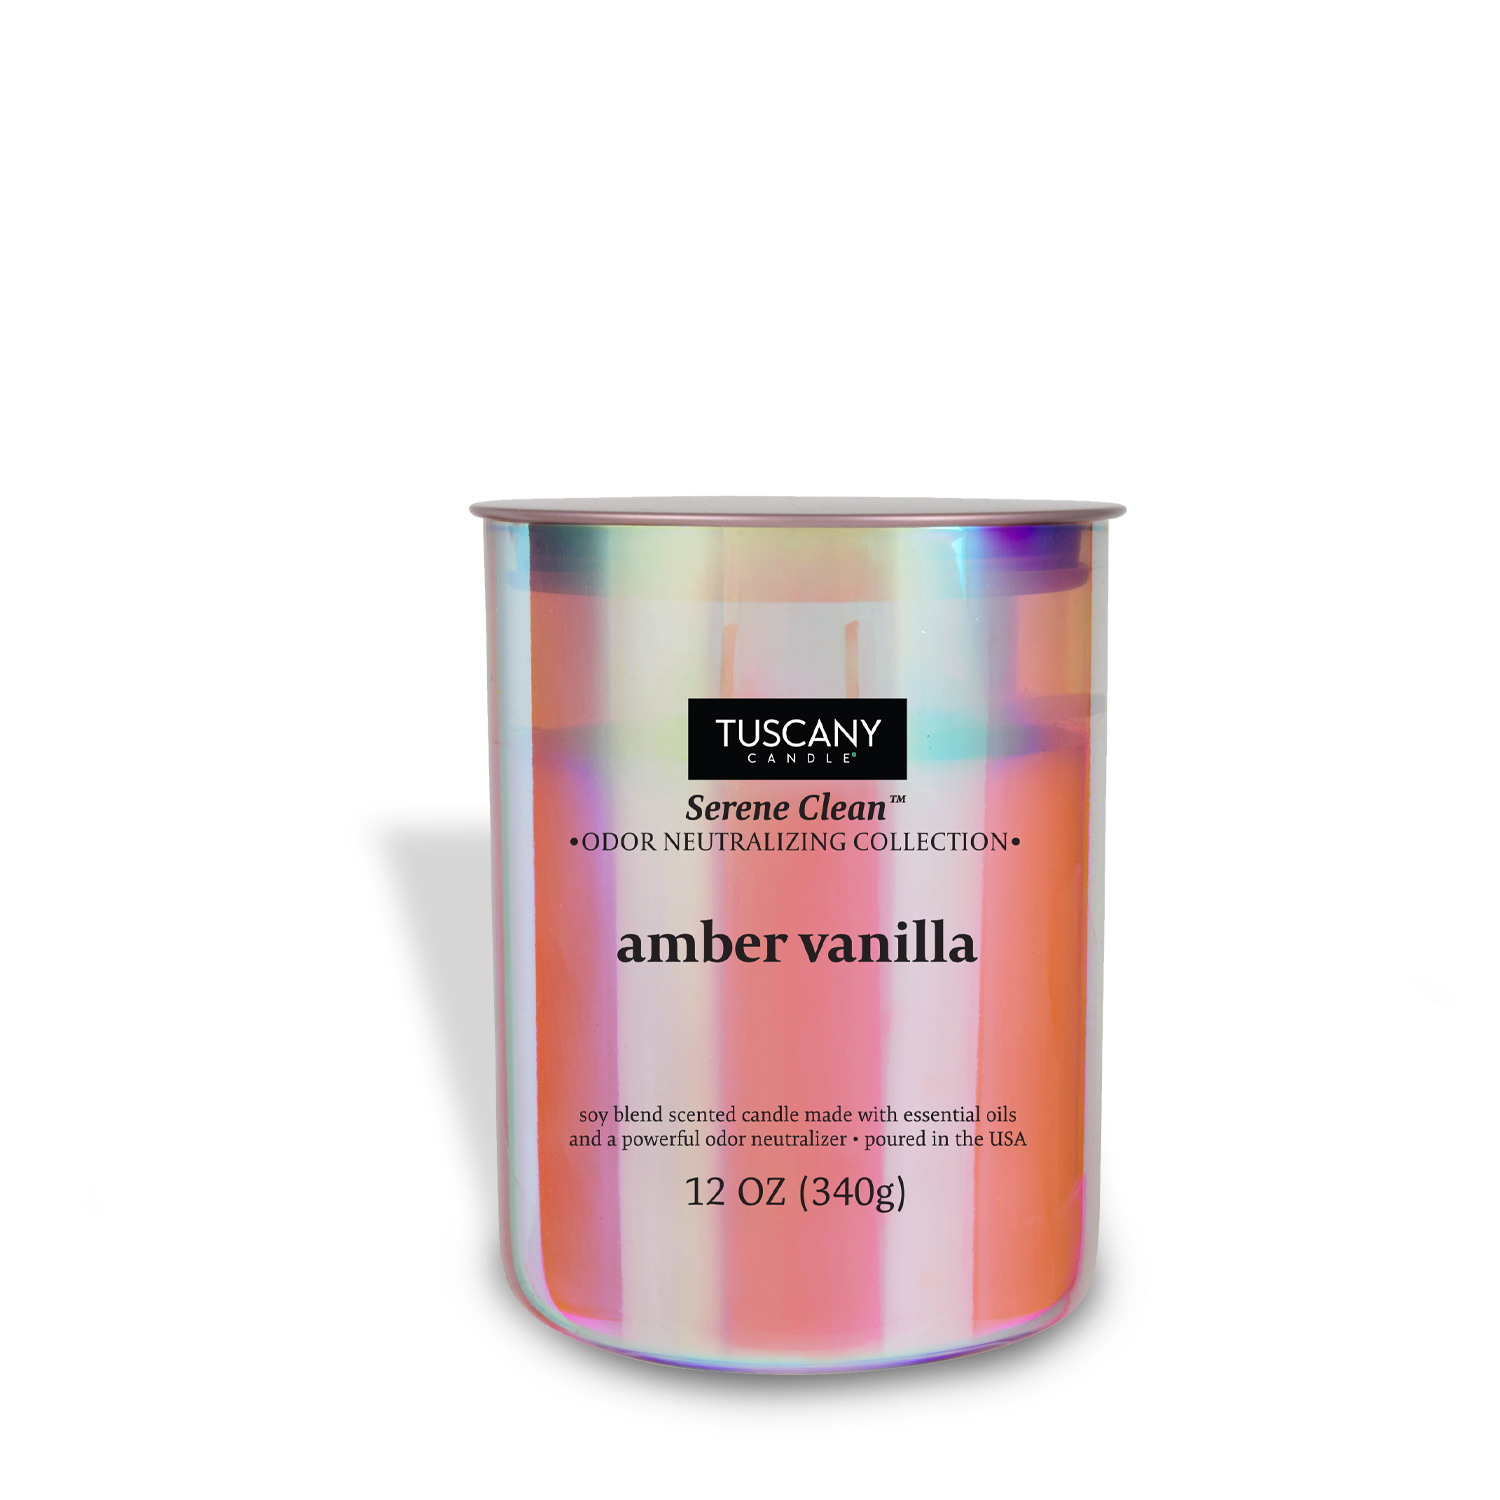 Vanilla Amber Scented Jar Candle (12 oz) by Tuscany Candle® EVD in a tin on a white background.